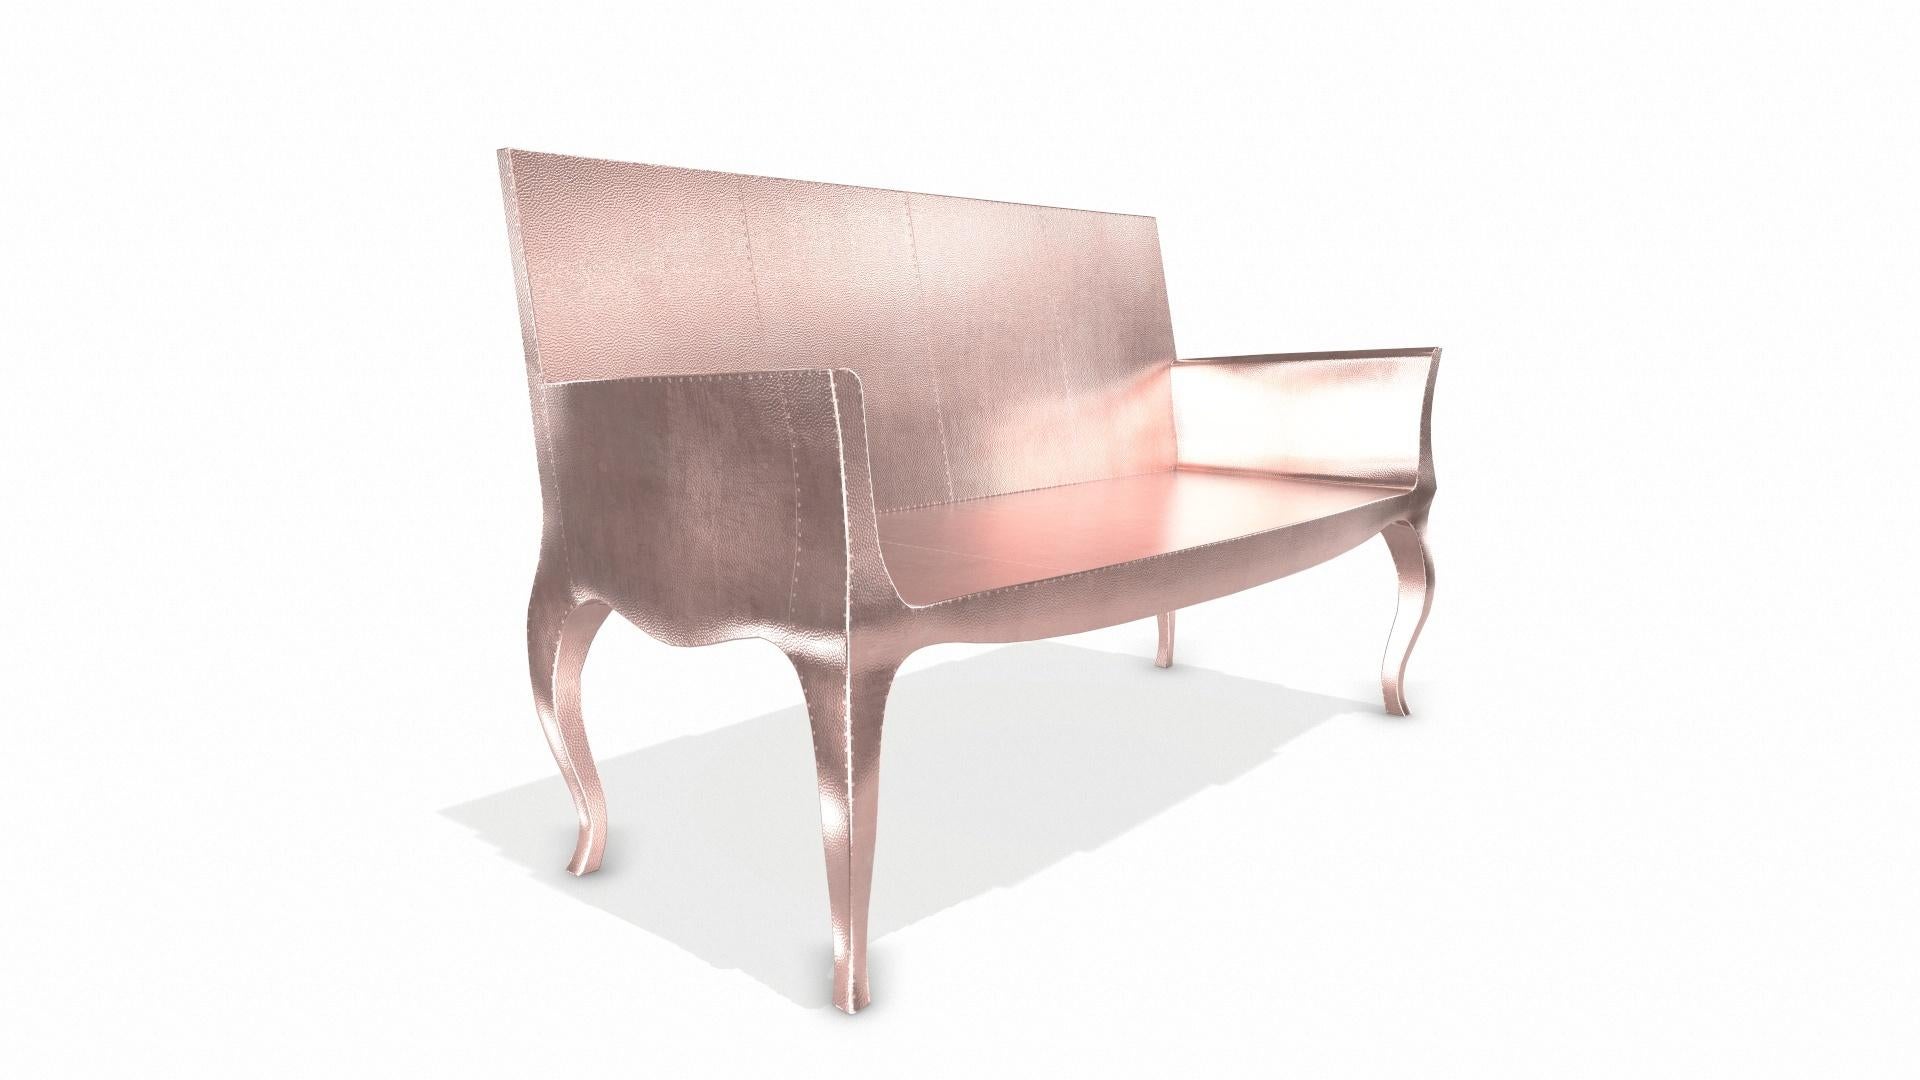 Louise Settee Art Deco Chaise Longues  in Mid. Hammered Copper by Paul Mathieu In New Condition For Sale In New York, NY